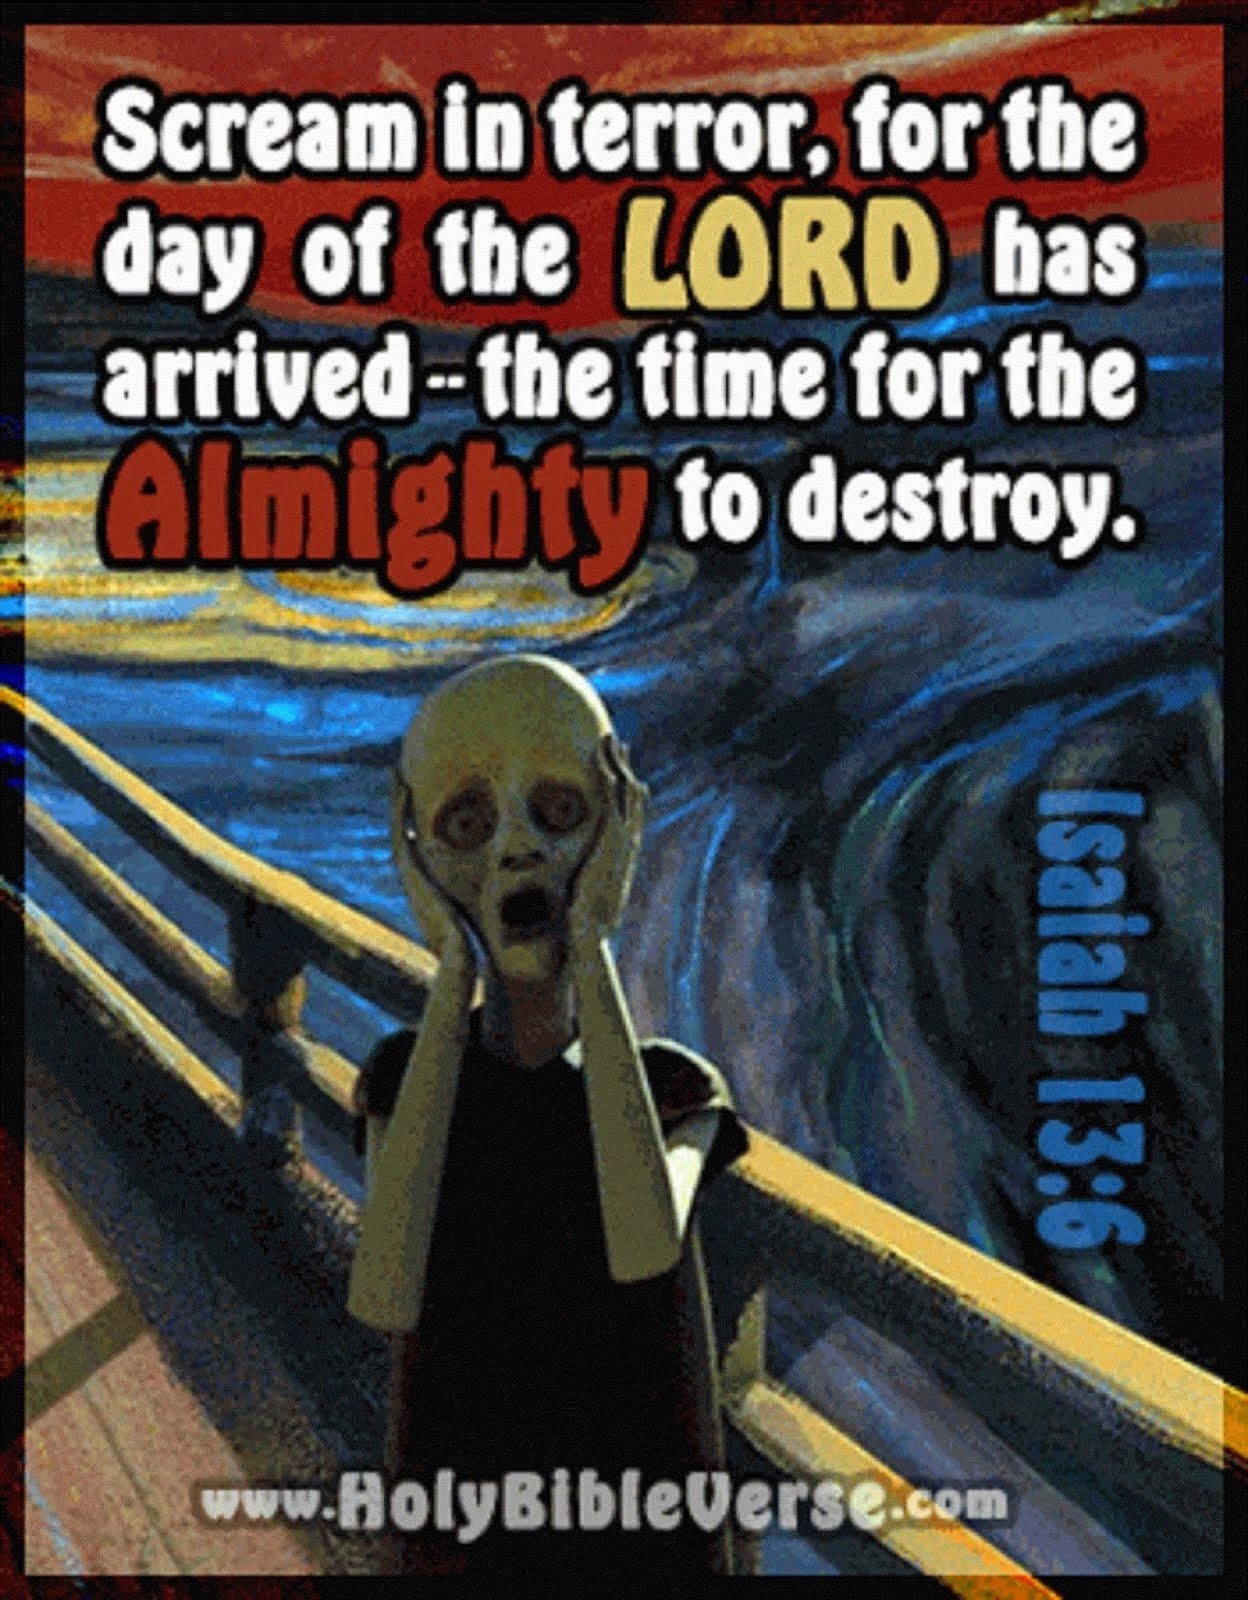 THE DAY OF THE LORD  HAS ARRIVED FOR THE ALMIGHTY TO DESTROY